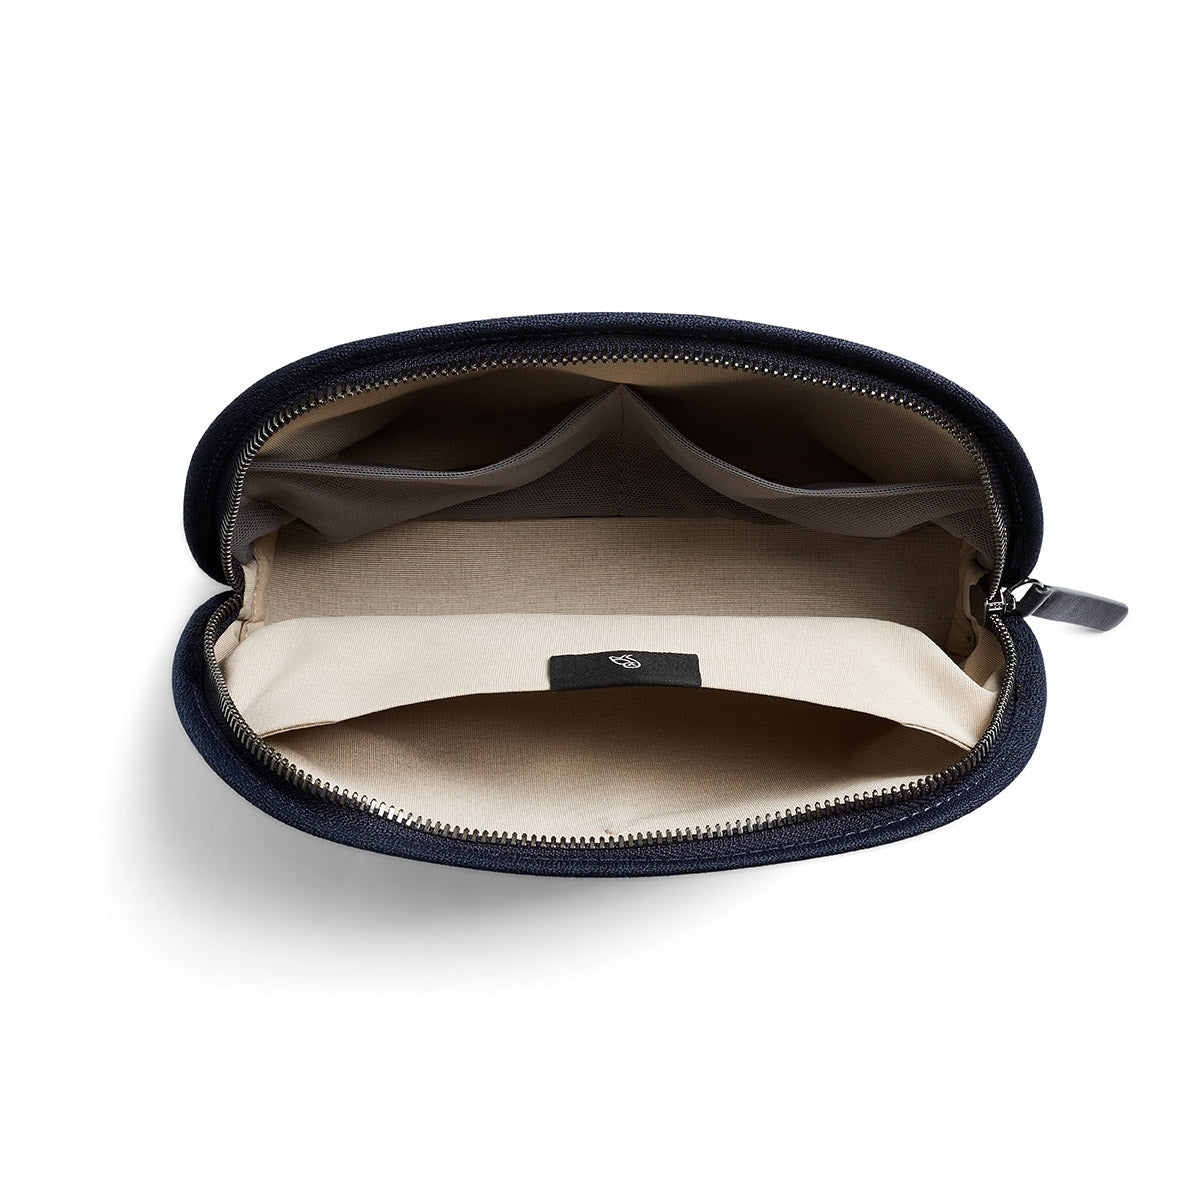 Bellroy Classic Pouch in Navy